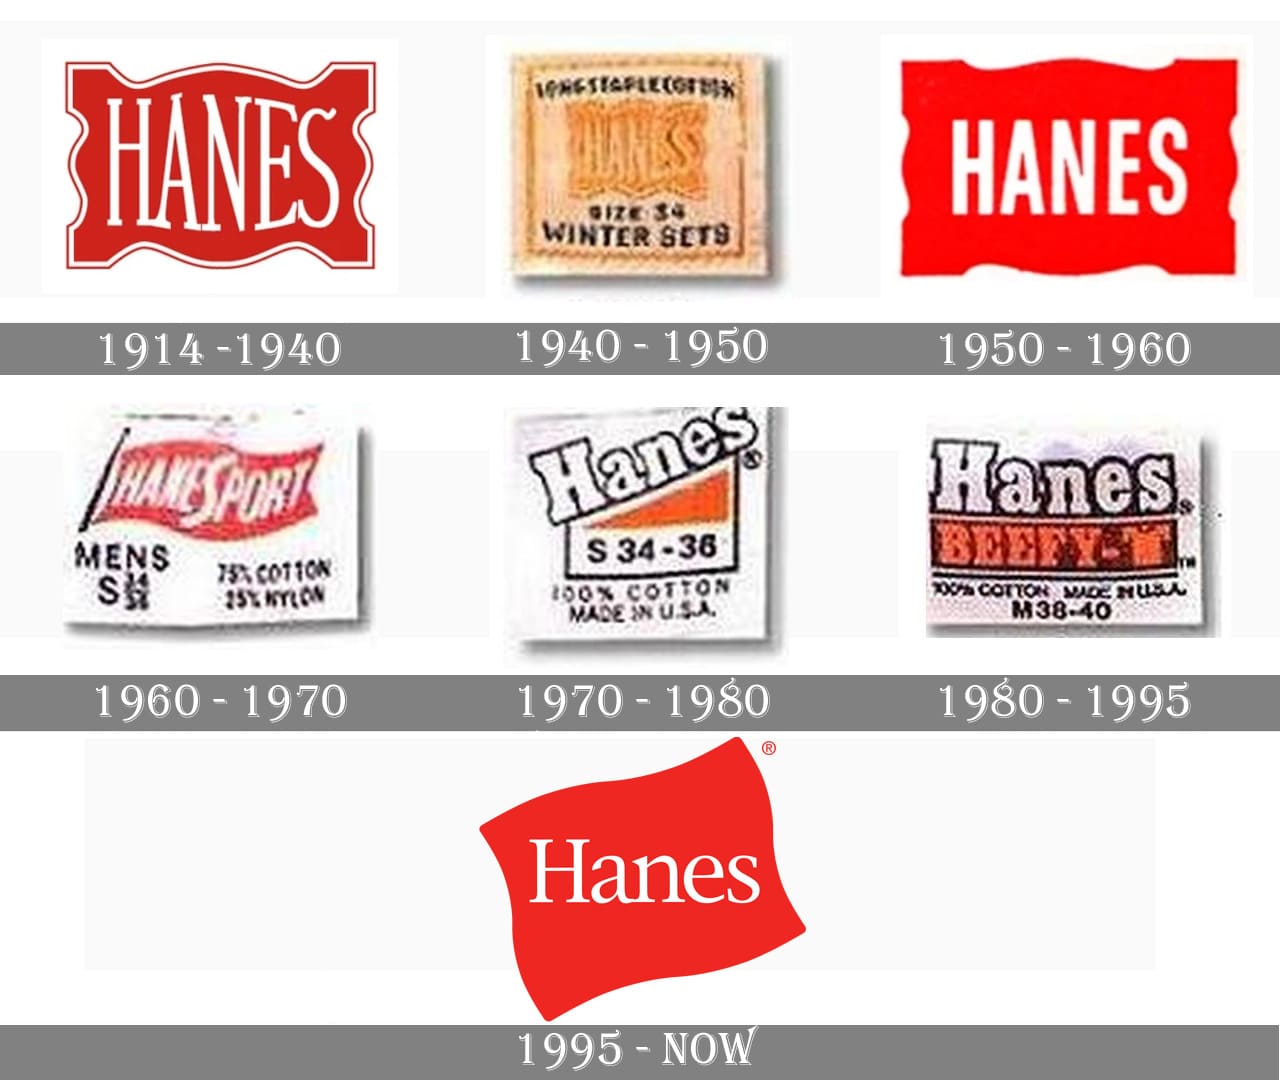 Hanes Logo Marques Et Logos Histoire Et Signification Png Images And